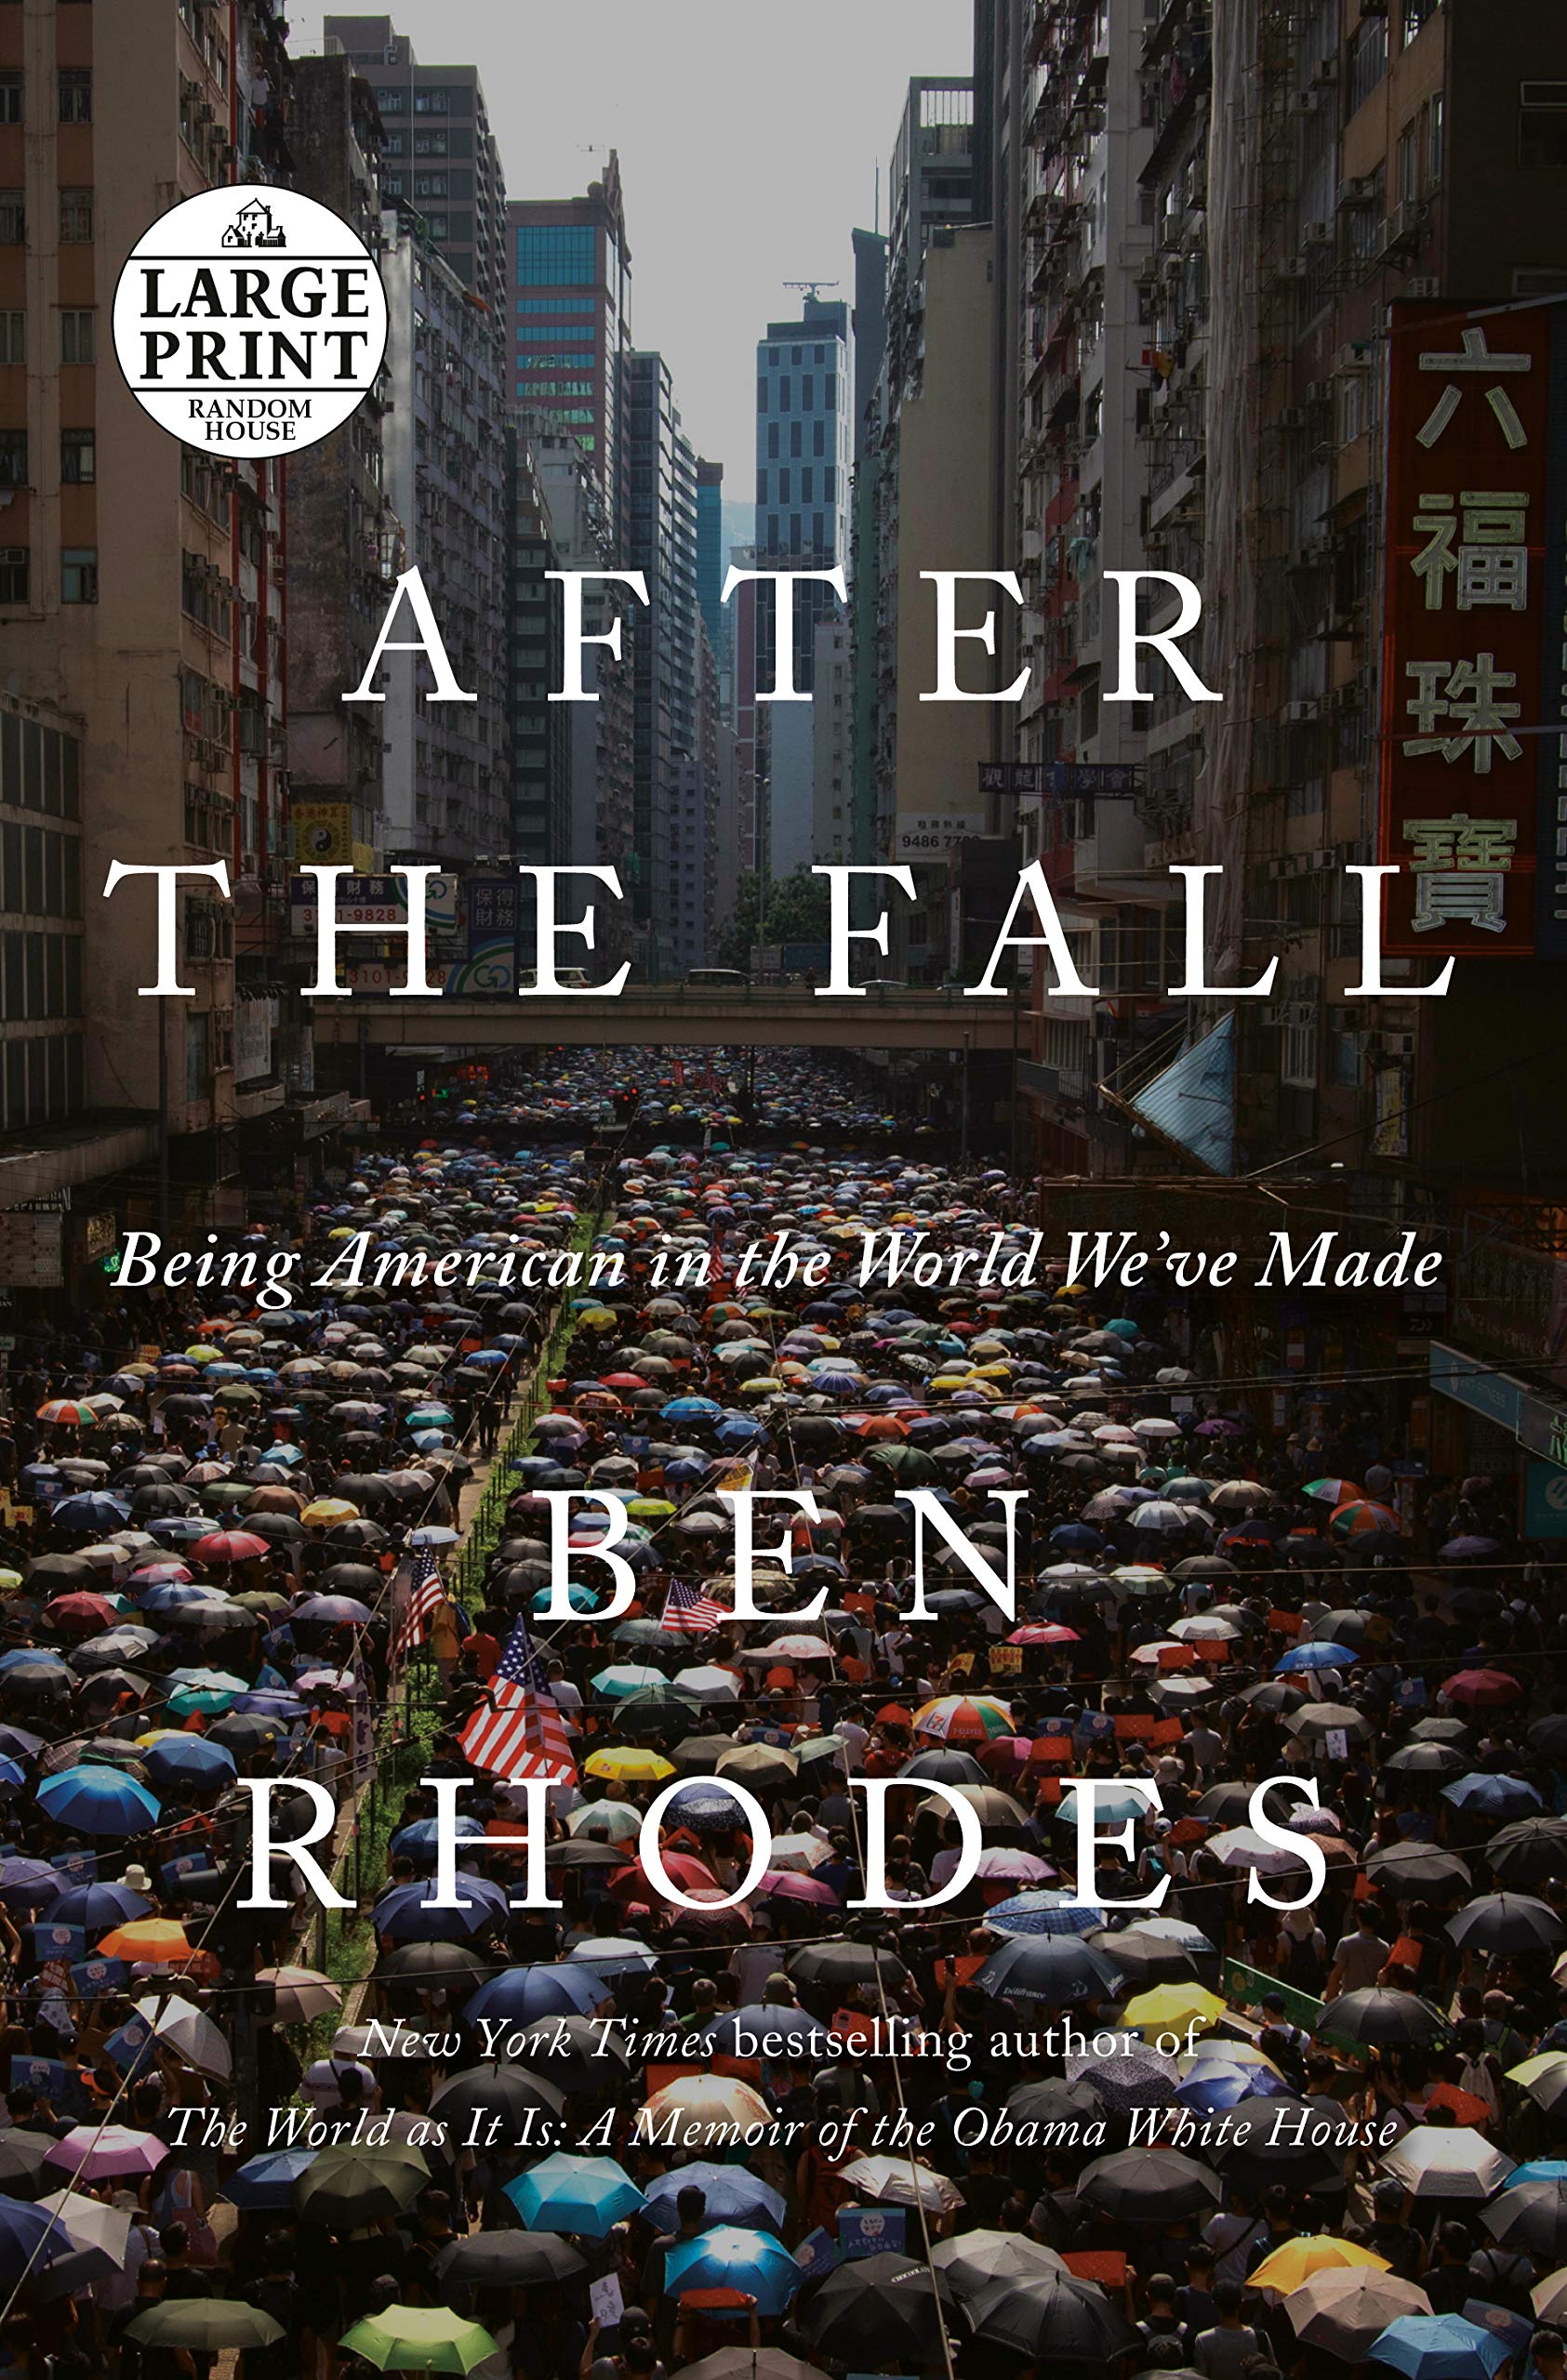 “After the Fall: Being American in the World We’ve Made” by Ben Rhodes